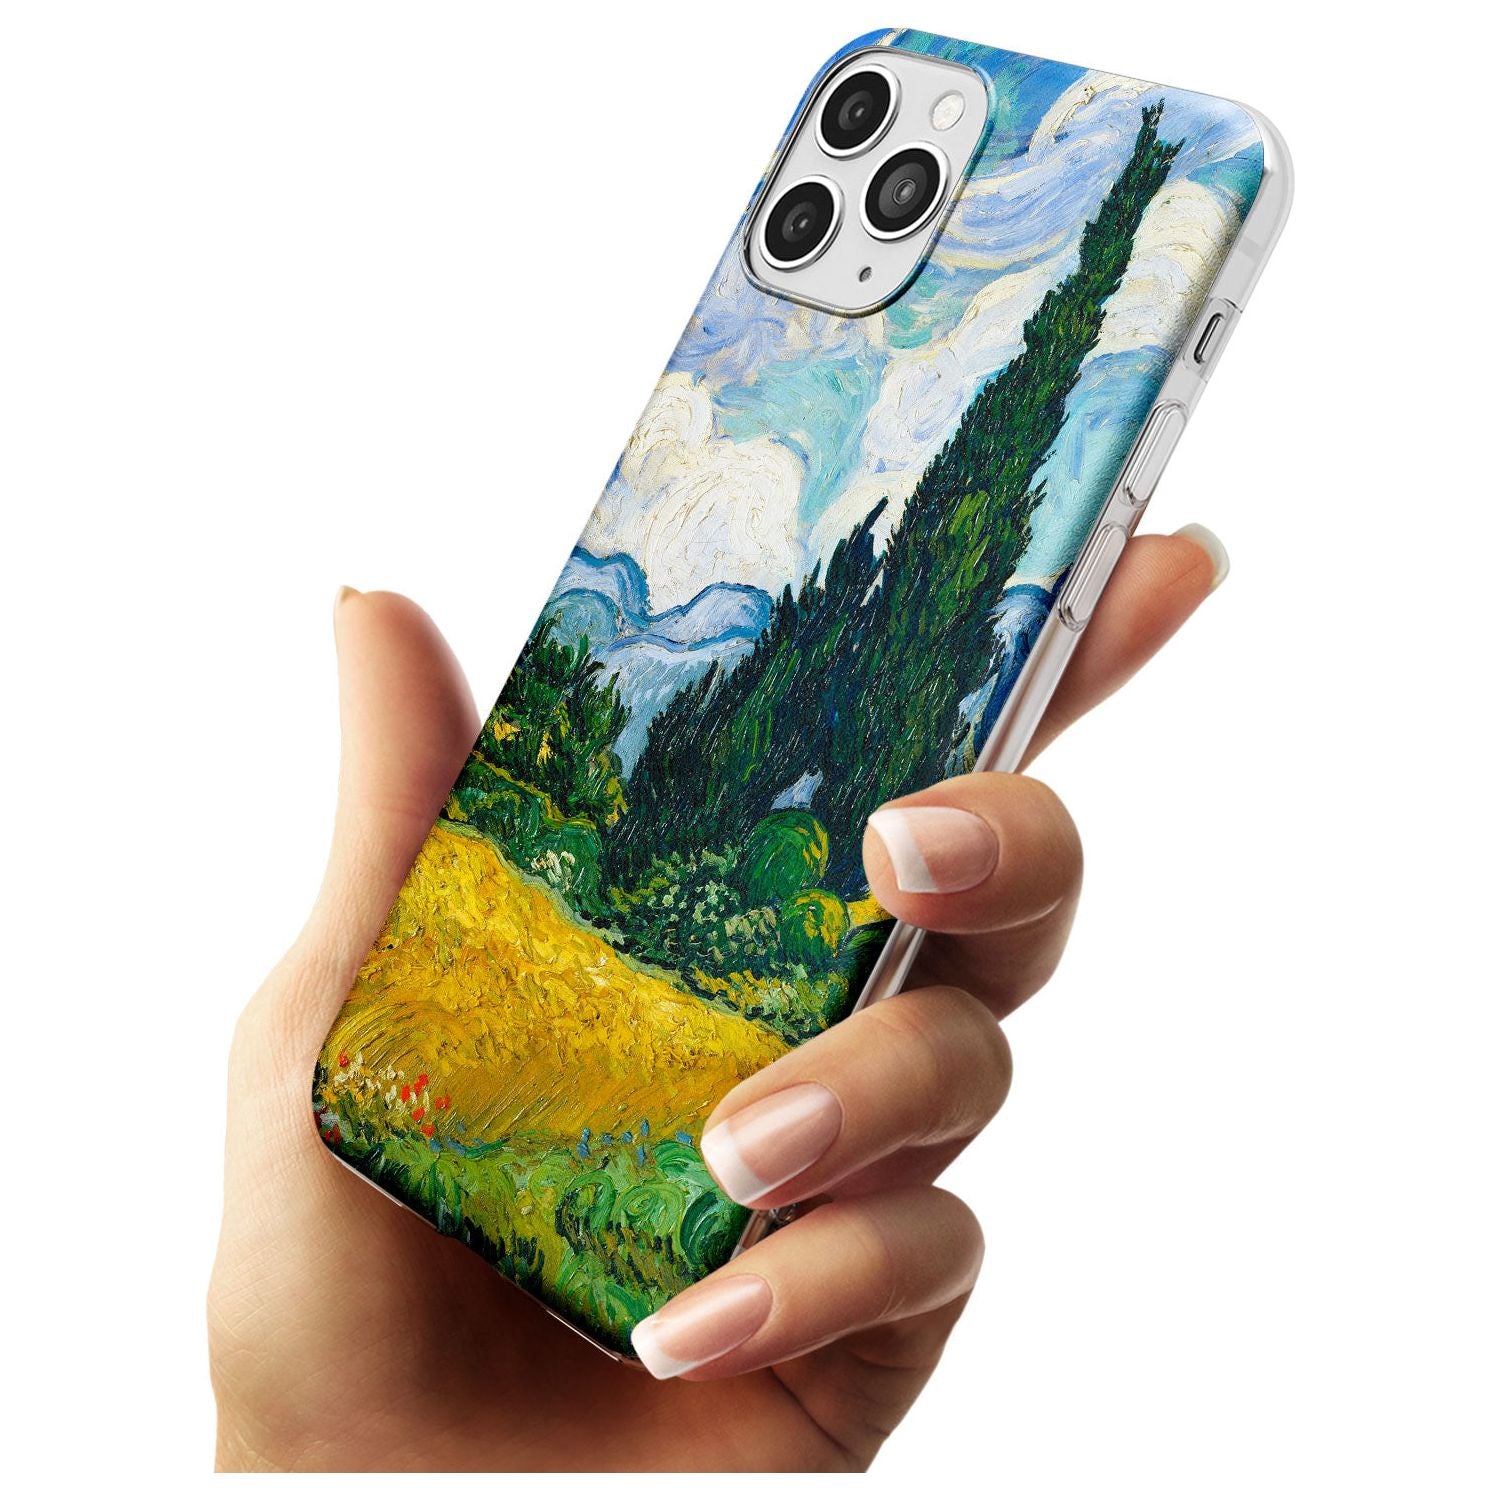 Wheat Field with Cypresses by Vincent Van Gogh Black Impact Phone Case for iPhone 11 Pro Max